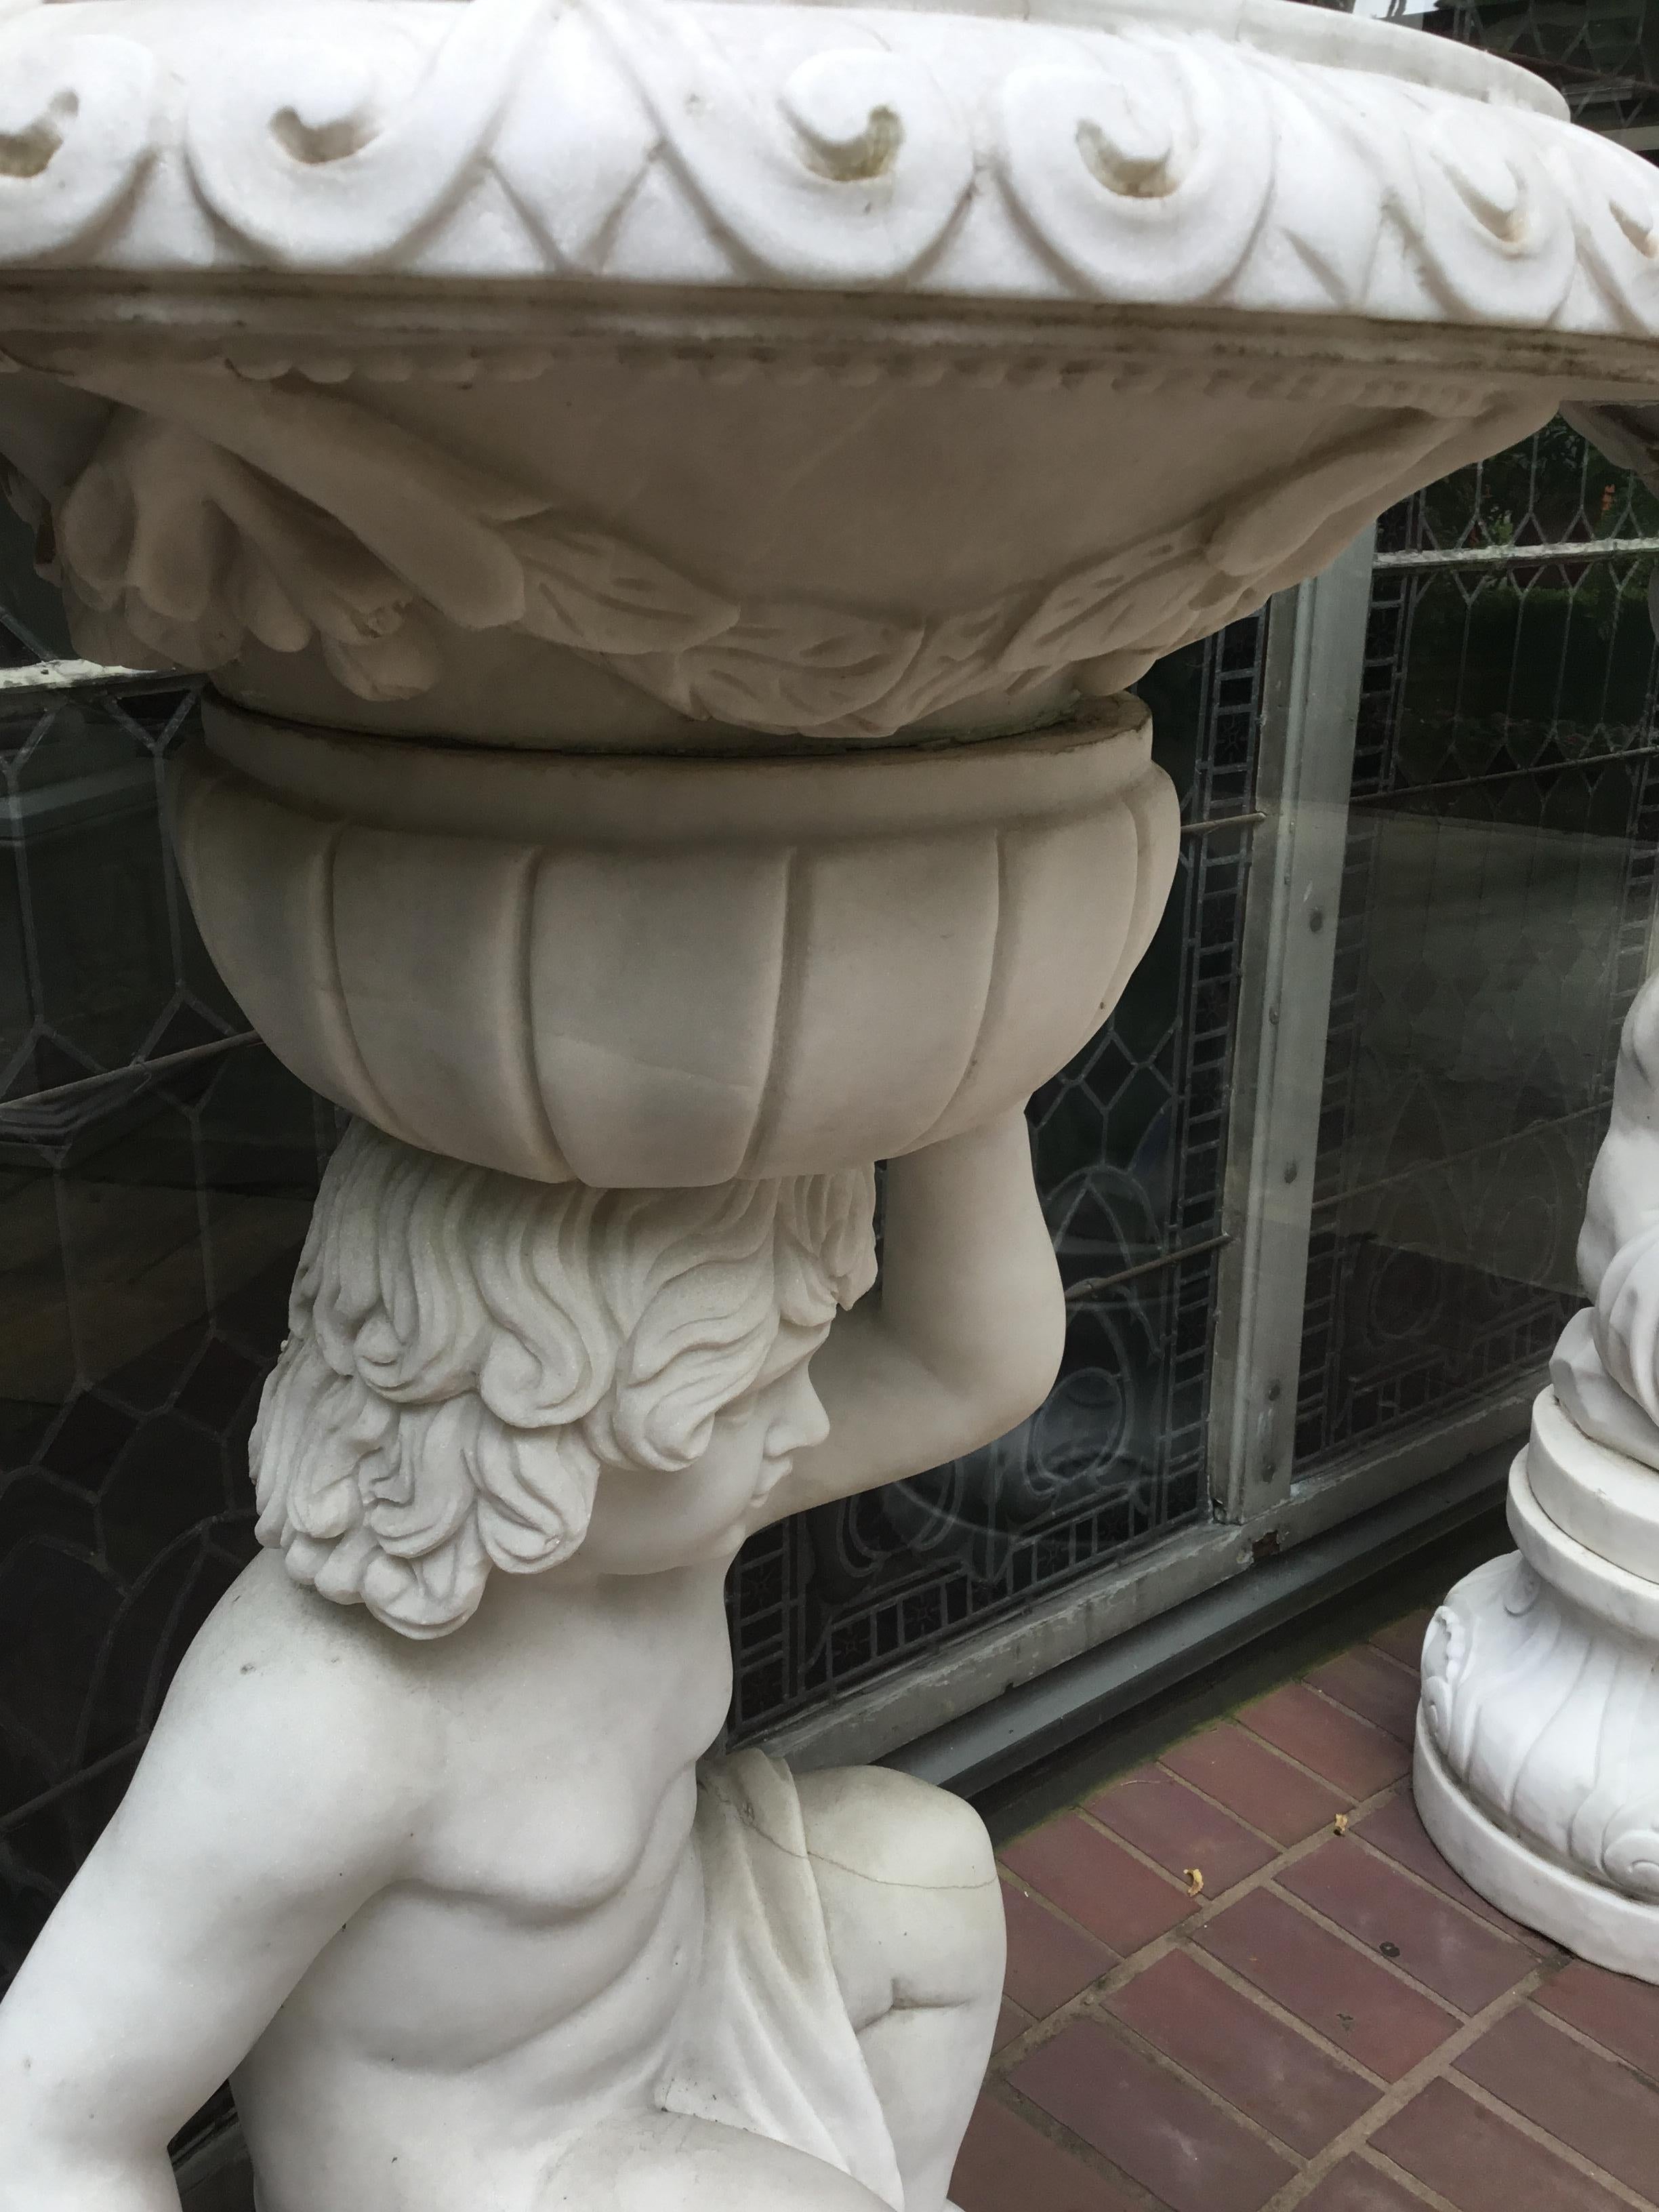 Pair of putti holding a carved marble bowl over their heads. All carved
marble. The figures slightly facing each other. Hole in the bottom of the
planter for drainage.